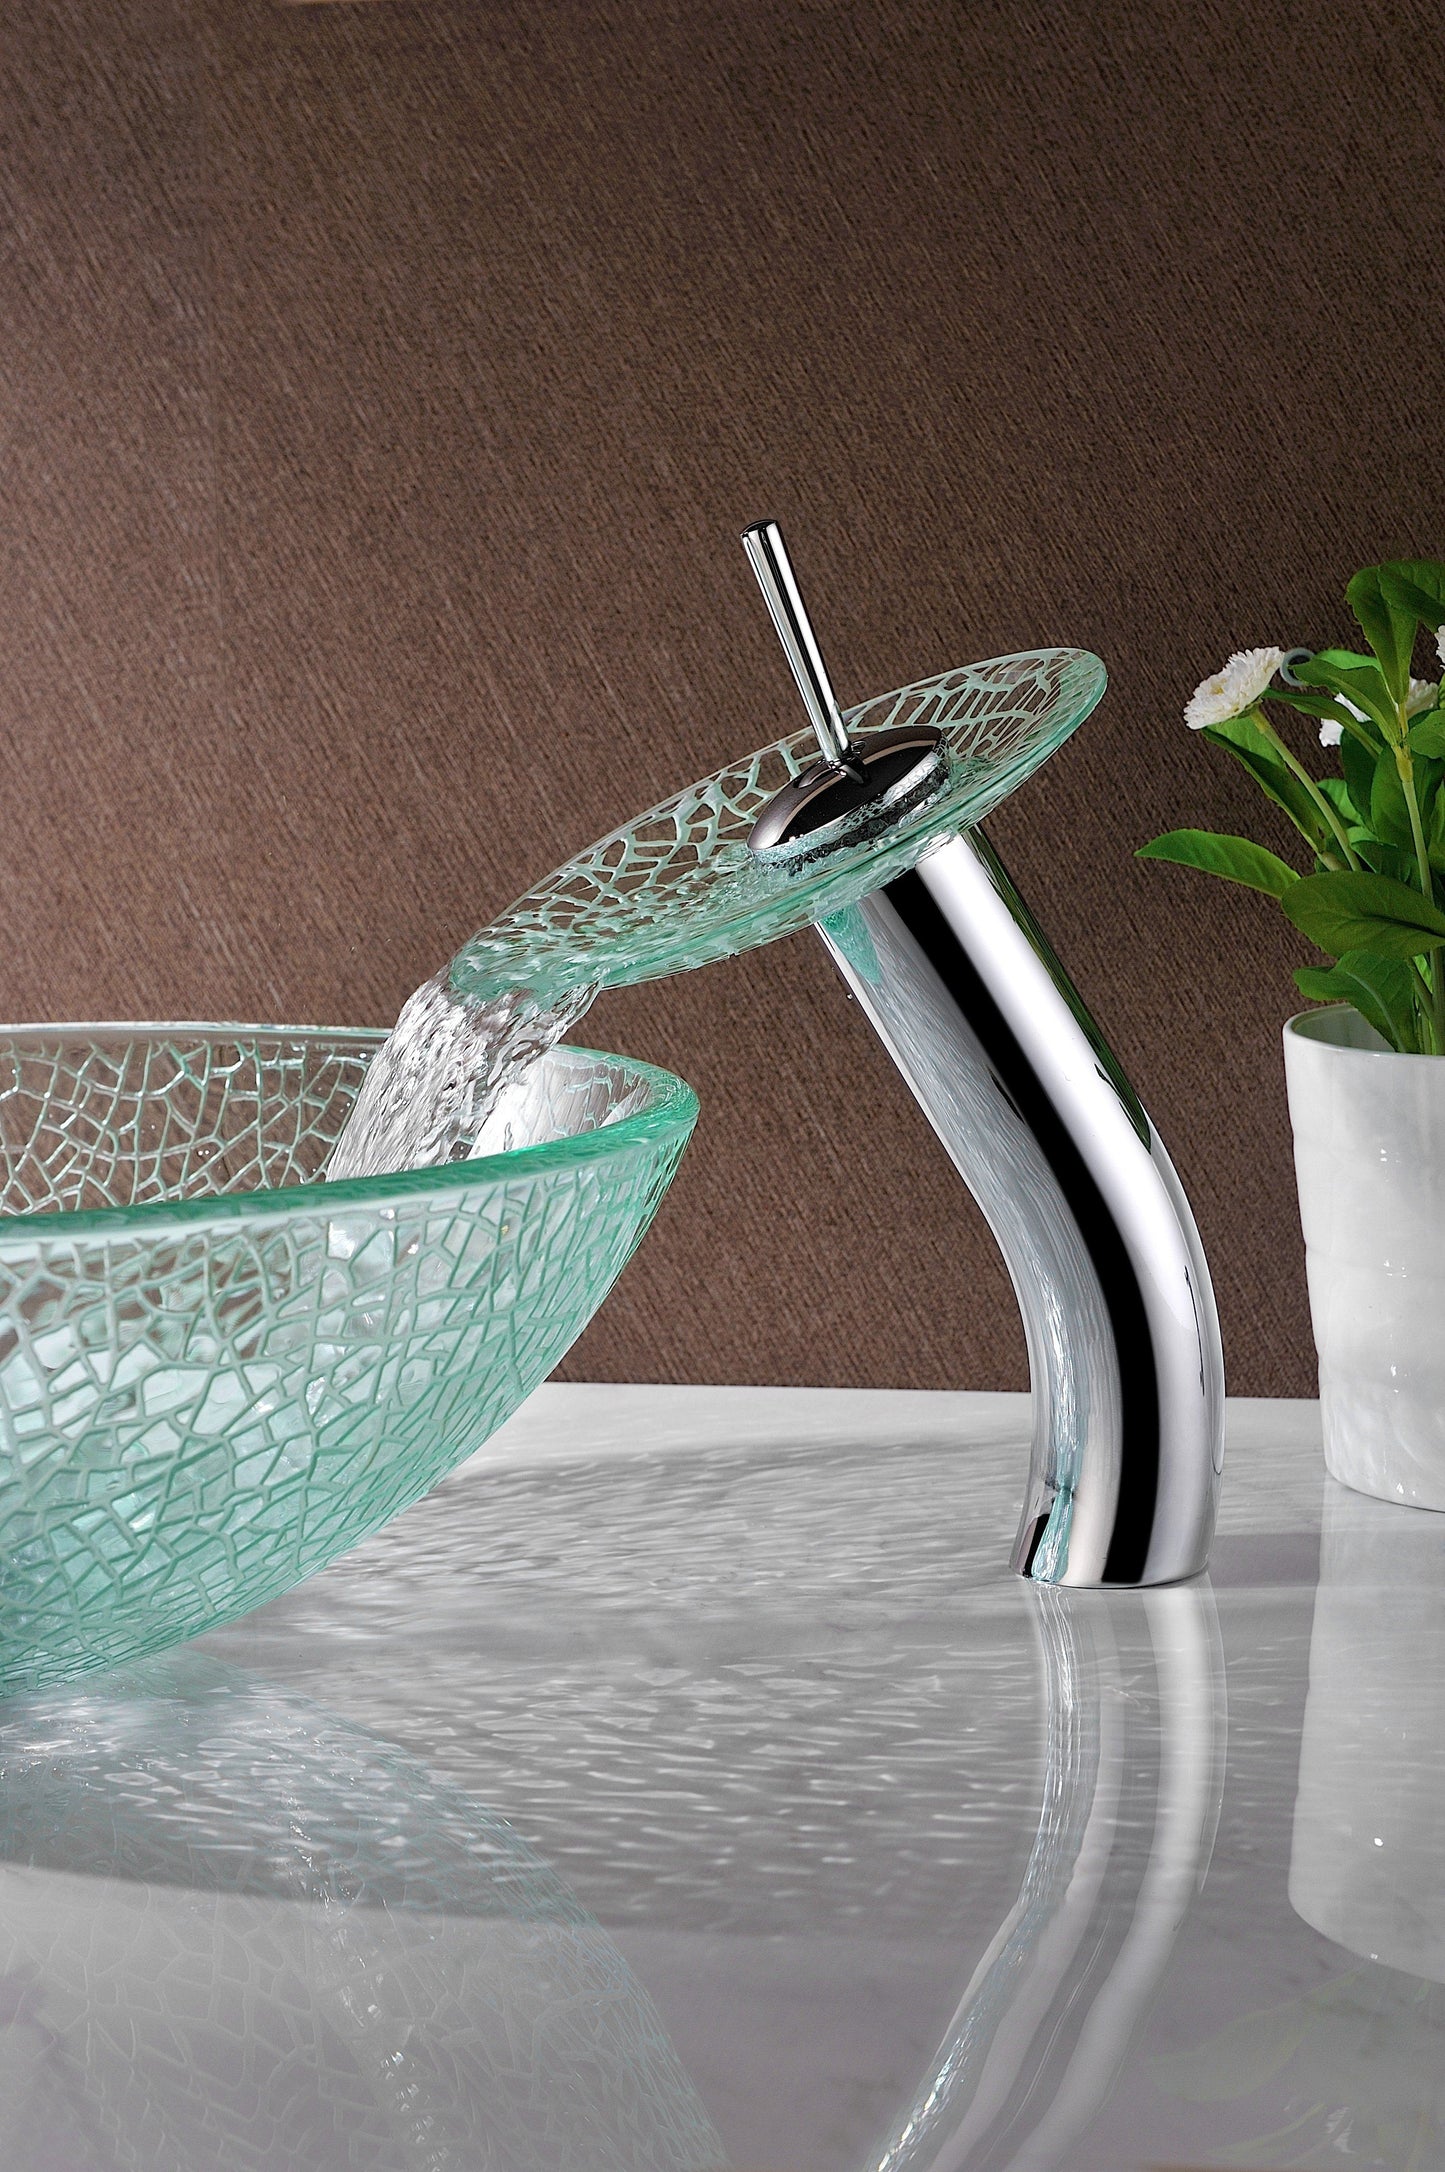 Choir Series Deco-Glass Vessel Sink in Crystal Clear Mosaic with Matching Chrome Waterfall Faucet - Luxe Bathroom Vanities